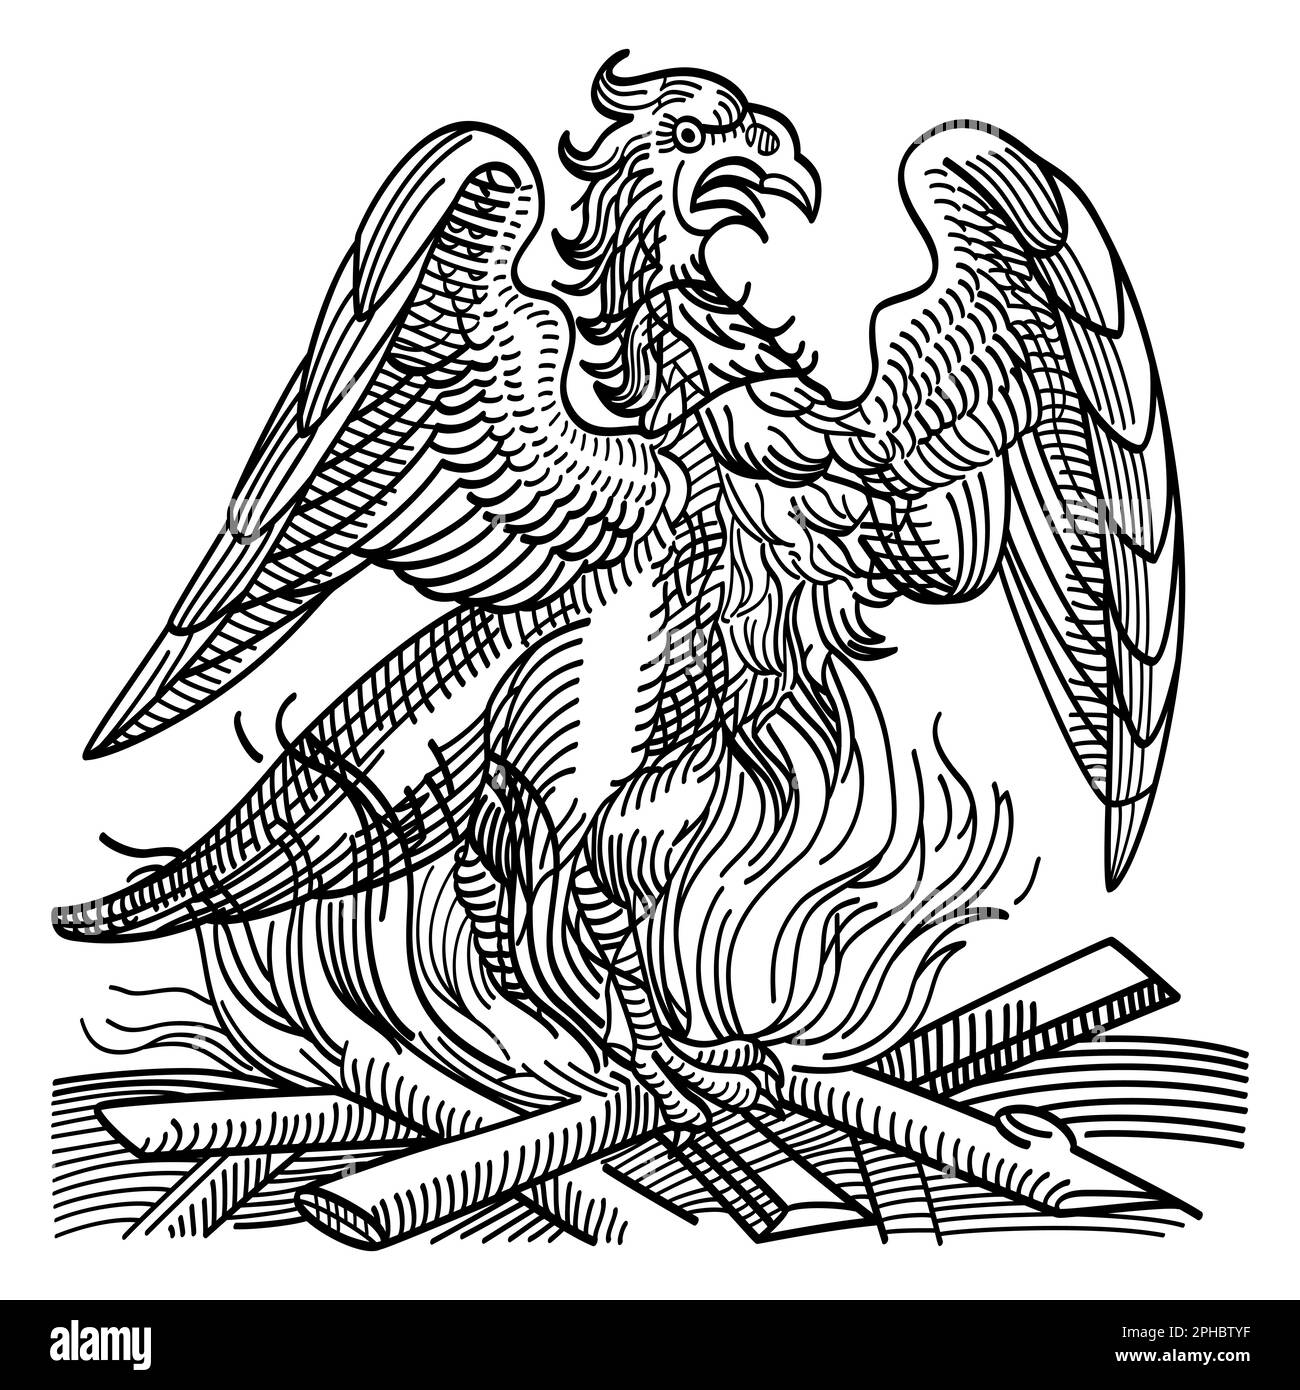 A phoenix obtains new life by rising from the ashes of its predecessor. Immortal bird and creature of the ancient Greek mythology. Stock Photo